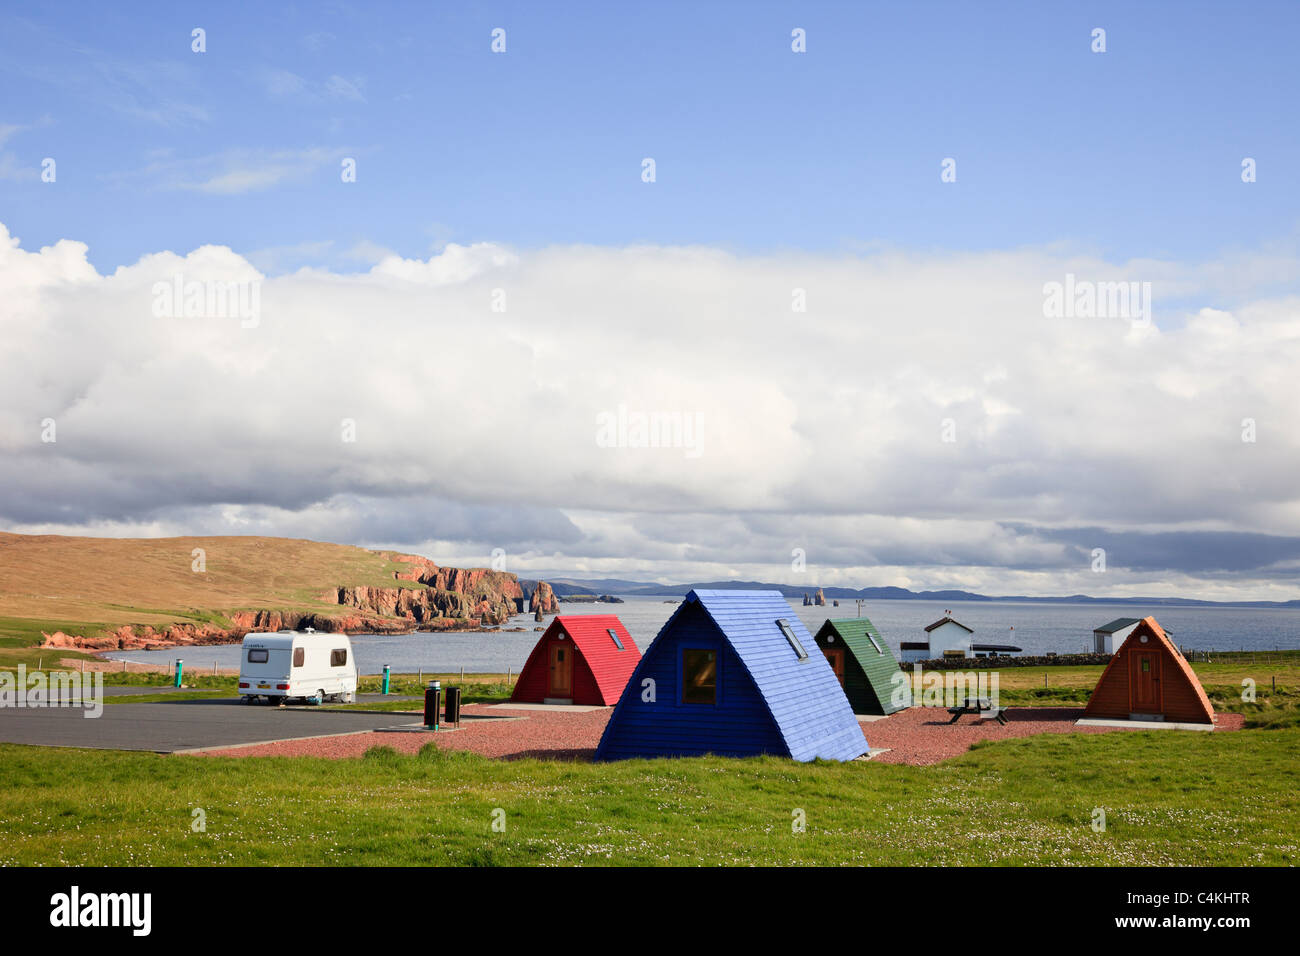 Wooden wigwams in Braewick cafe campsite on the coast overlooking the sea. Eshaness, Shetland Islands, Scotland, UK, Britain Stock Photo